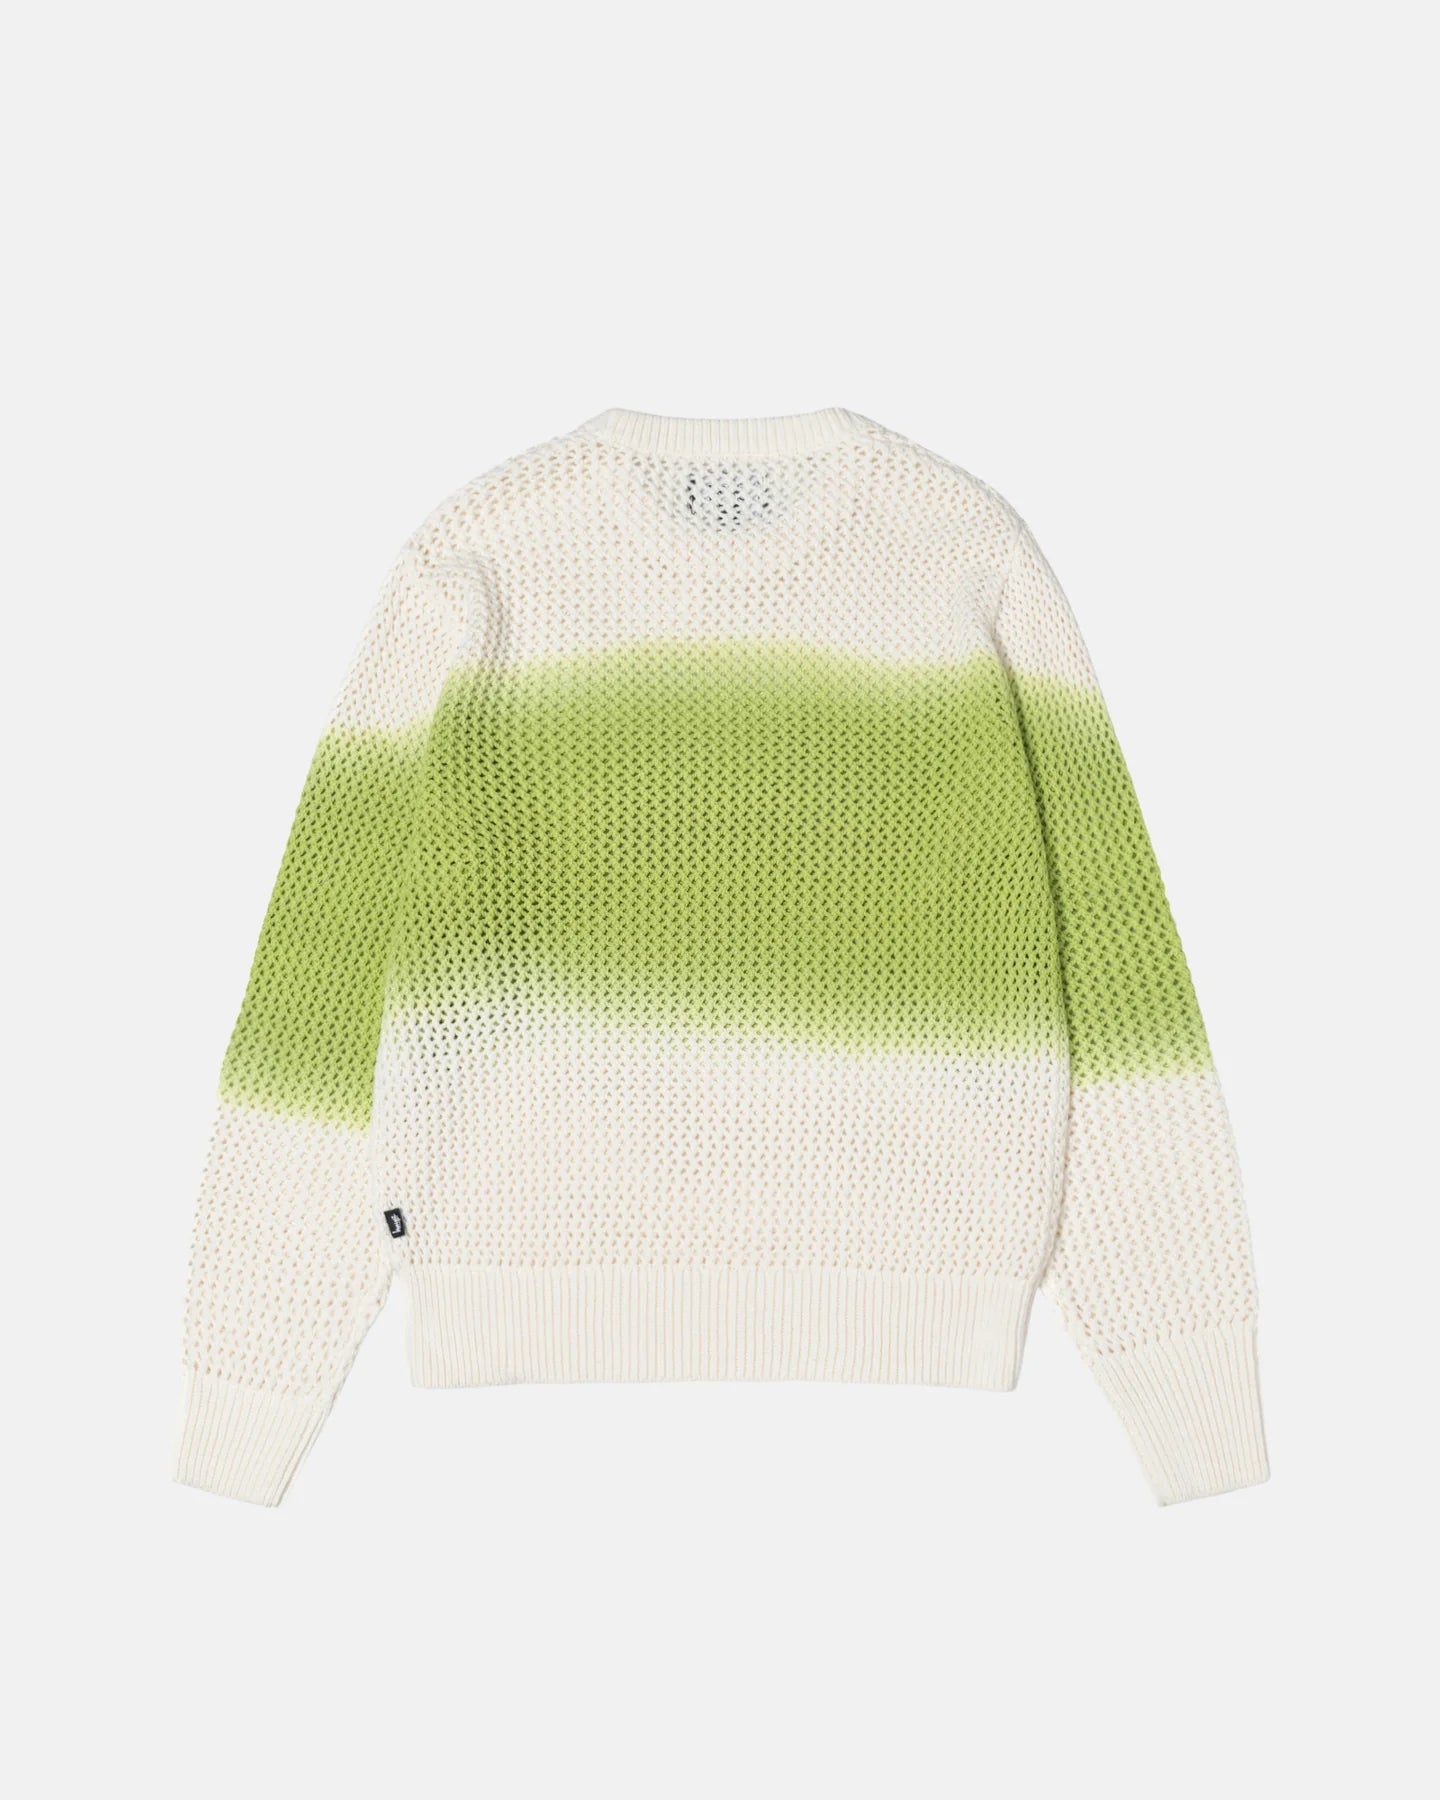 Stüssy Pig. Dyed Loose Gauge Sweater Bright Green